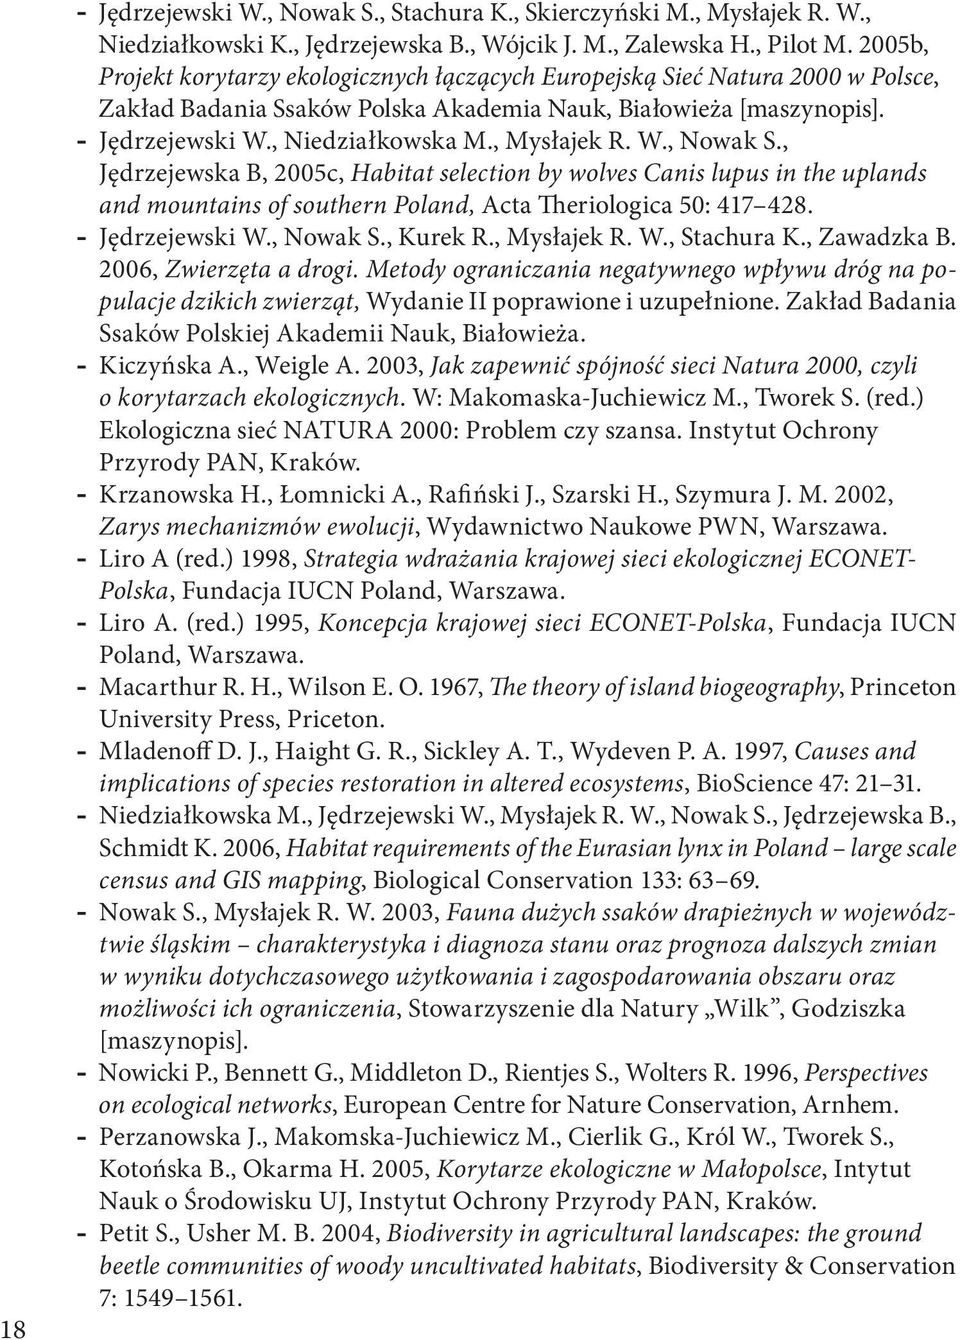 , Mysłajek R. W., Nowak S., Jędrzejewska B, 2005c, Habitat selection by wolves Canis lupus in the uplands and mountains of southern Poland, Acta Theriologica 50: 417 428. Jędrzejewski W., Nowak S., Kurek R.